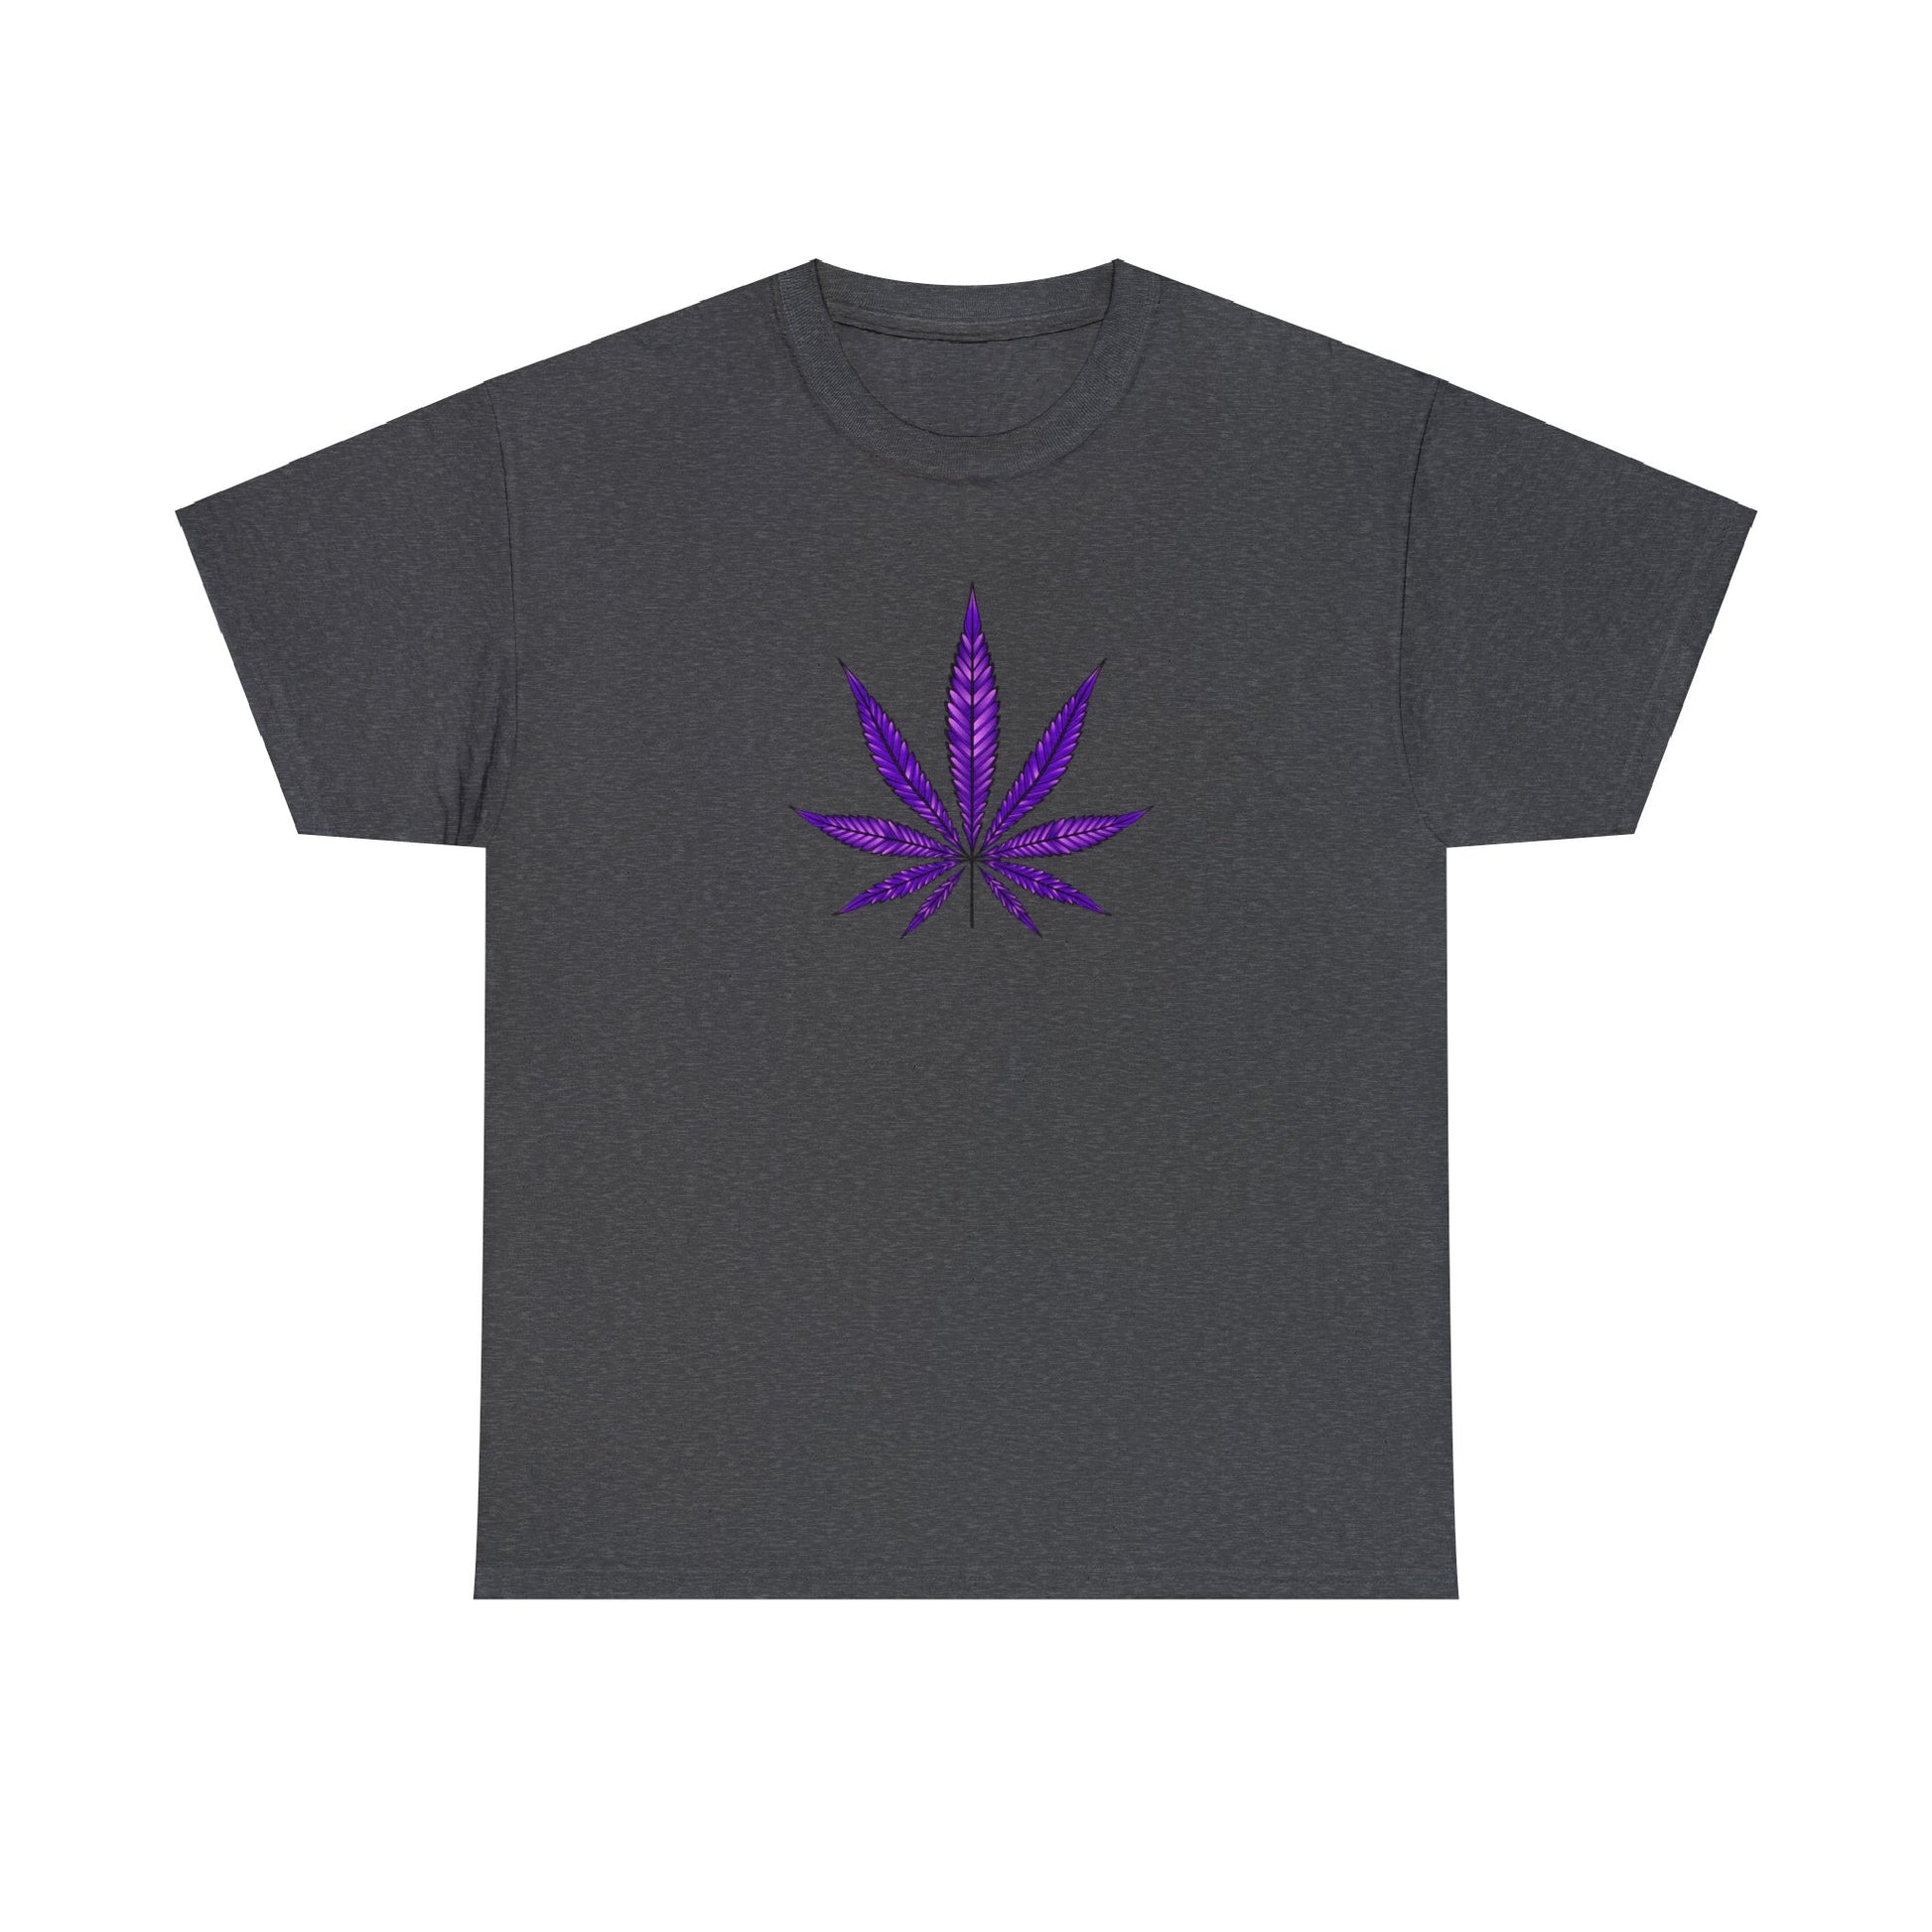 A vibrant gray Purple Cannabis Leaf Tee featuring a purple cannabis leaf graphic on the front, embodying marijuana culture.